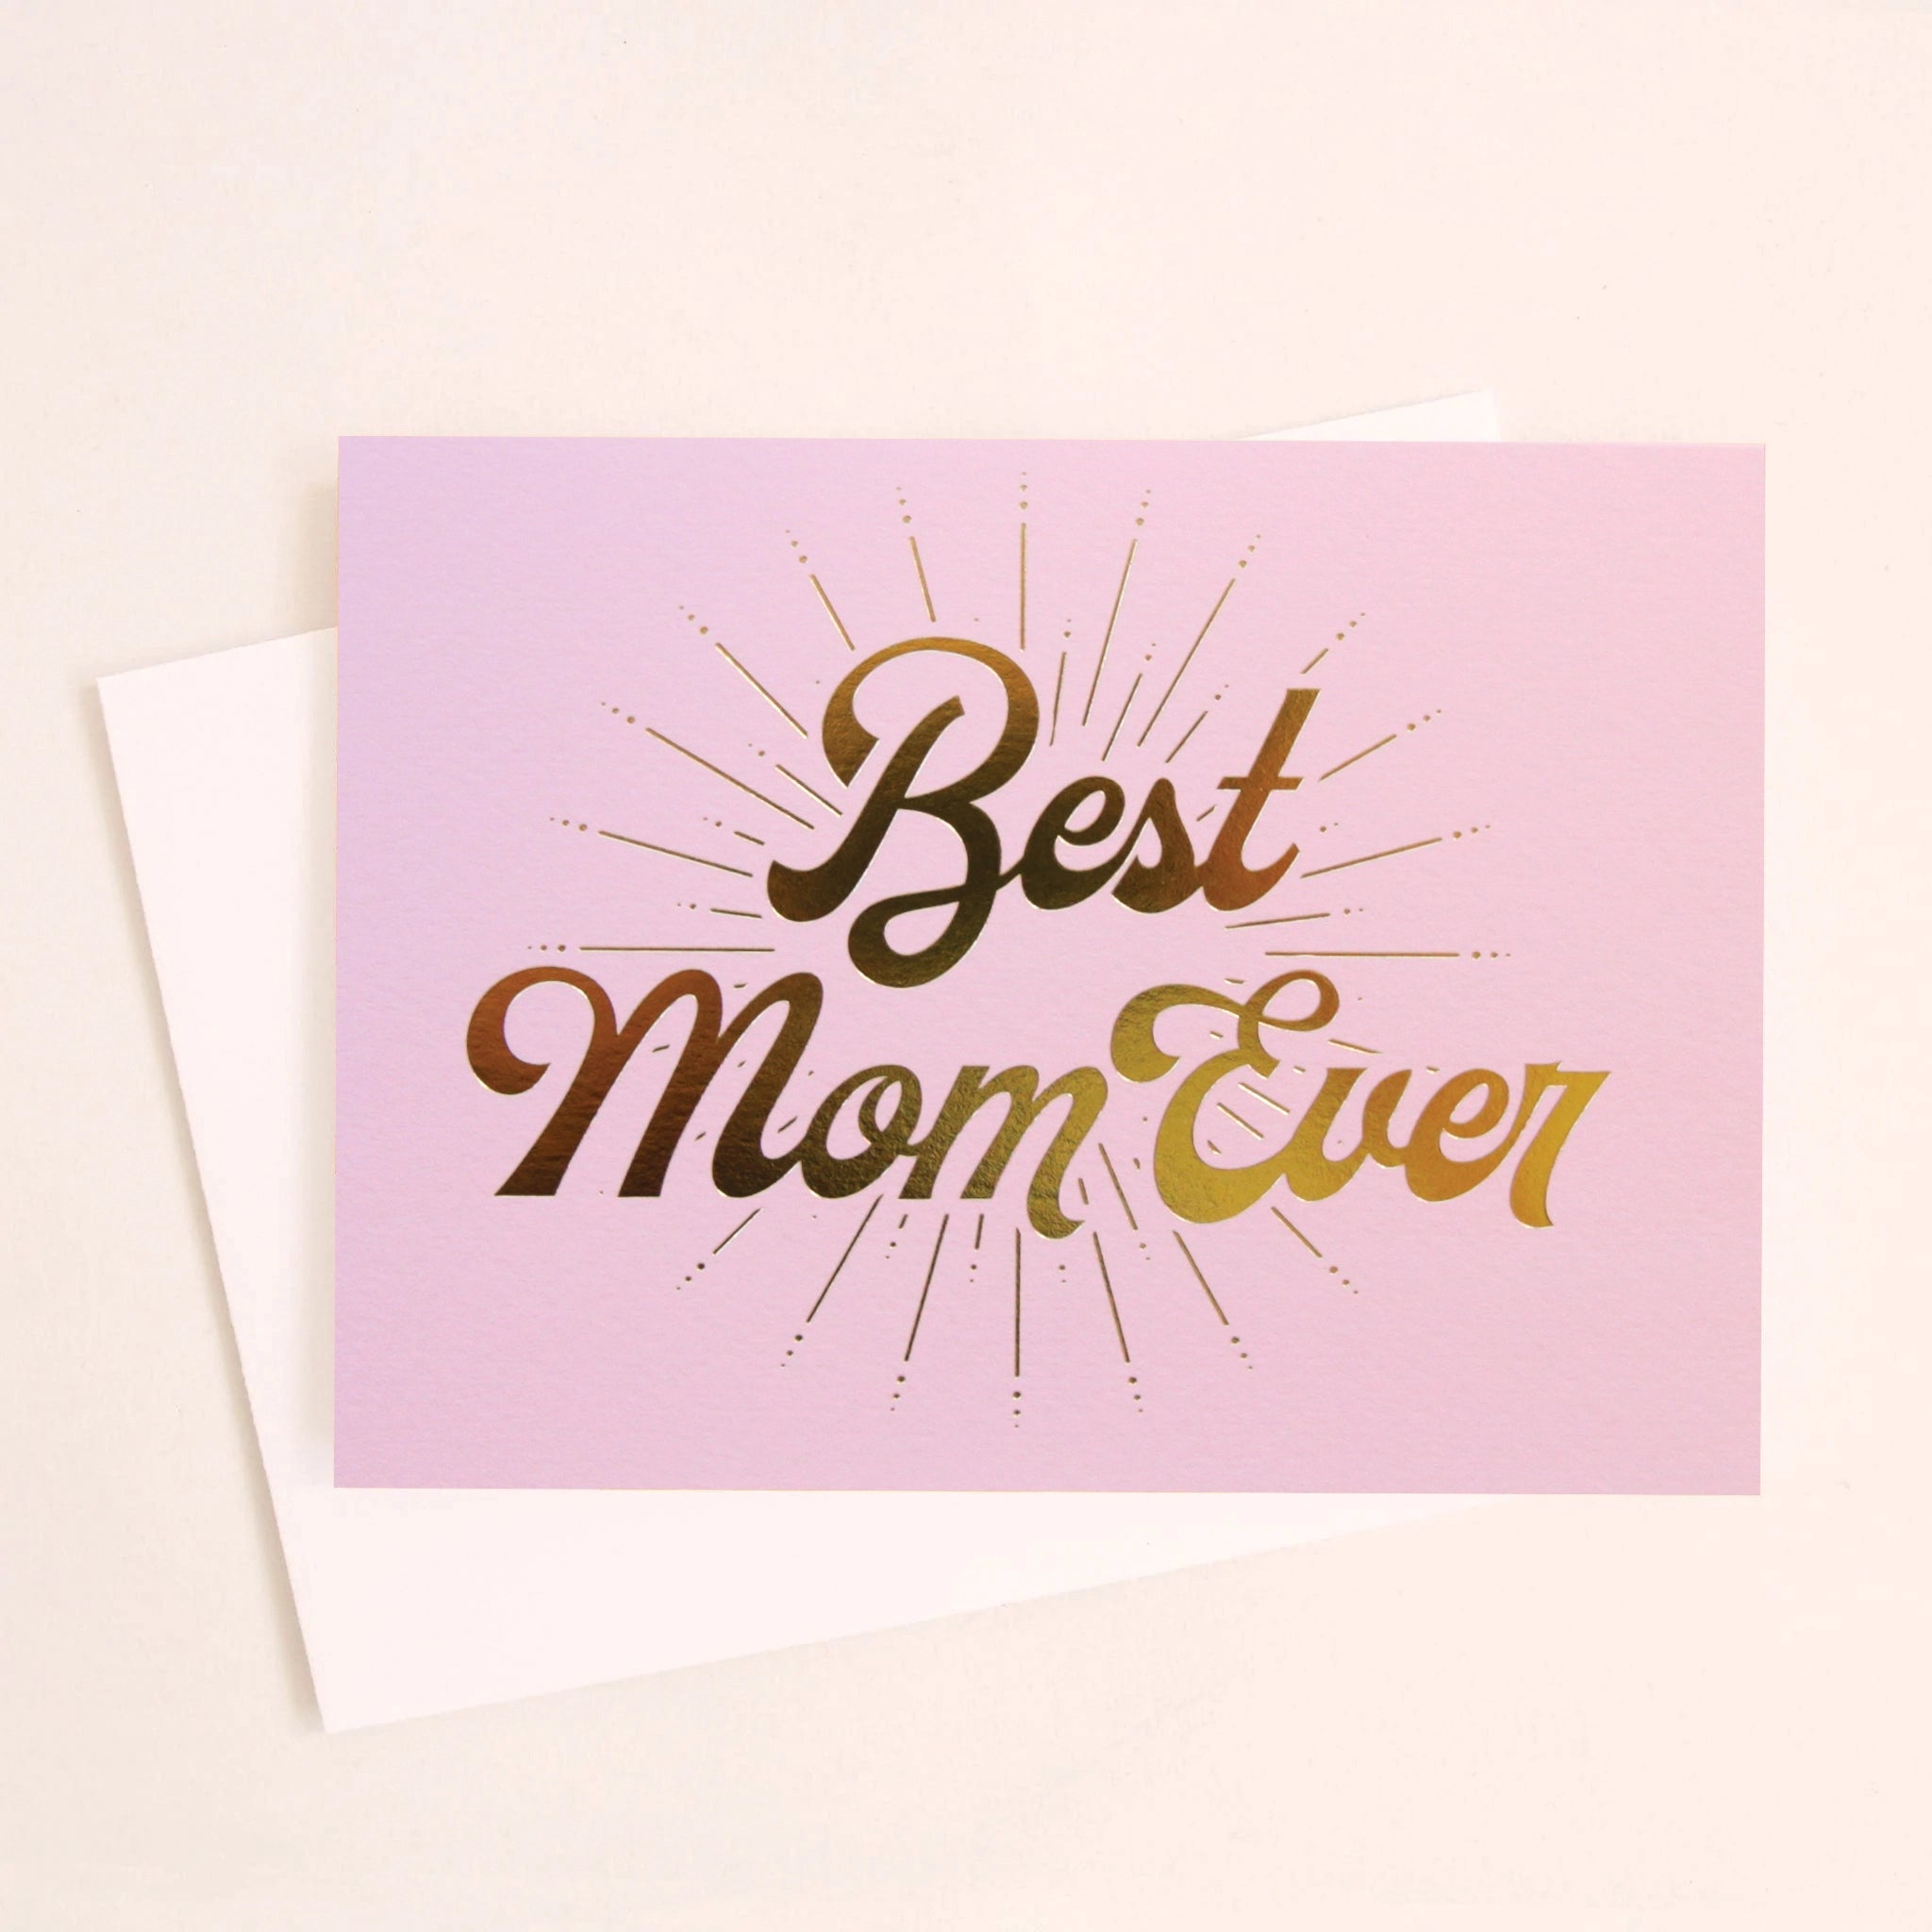 A lilac card with gold foiled letters that read, "Best Mom Ever" along with a white envelope.